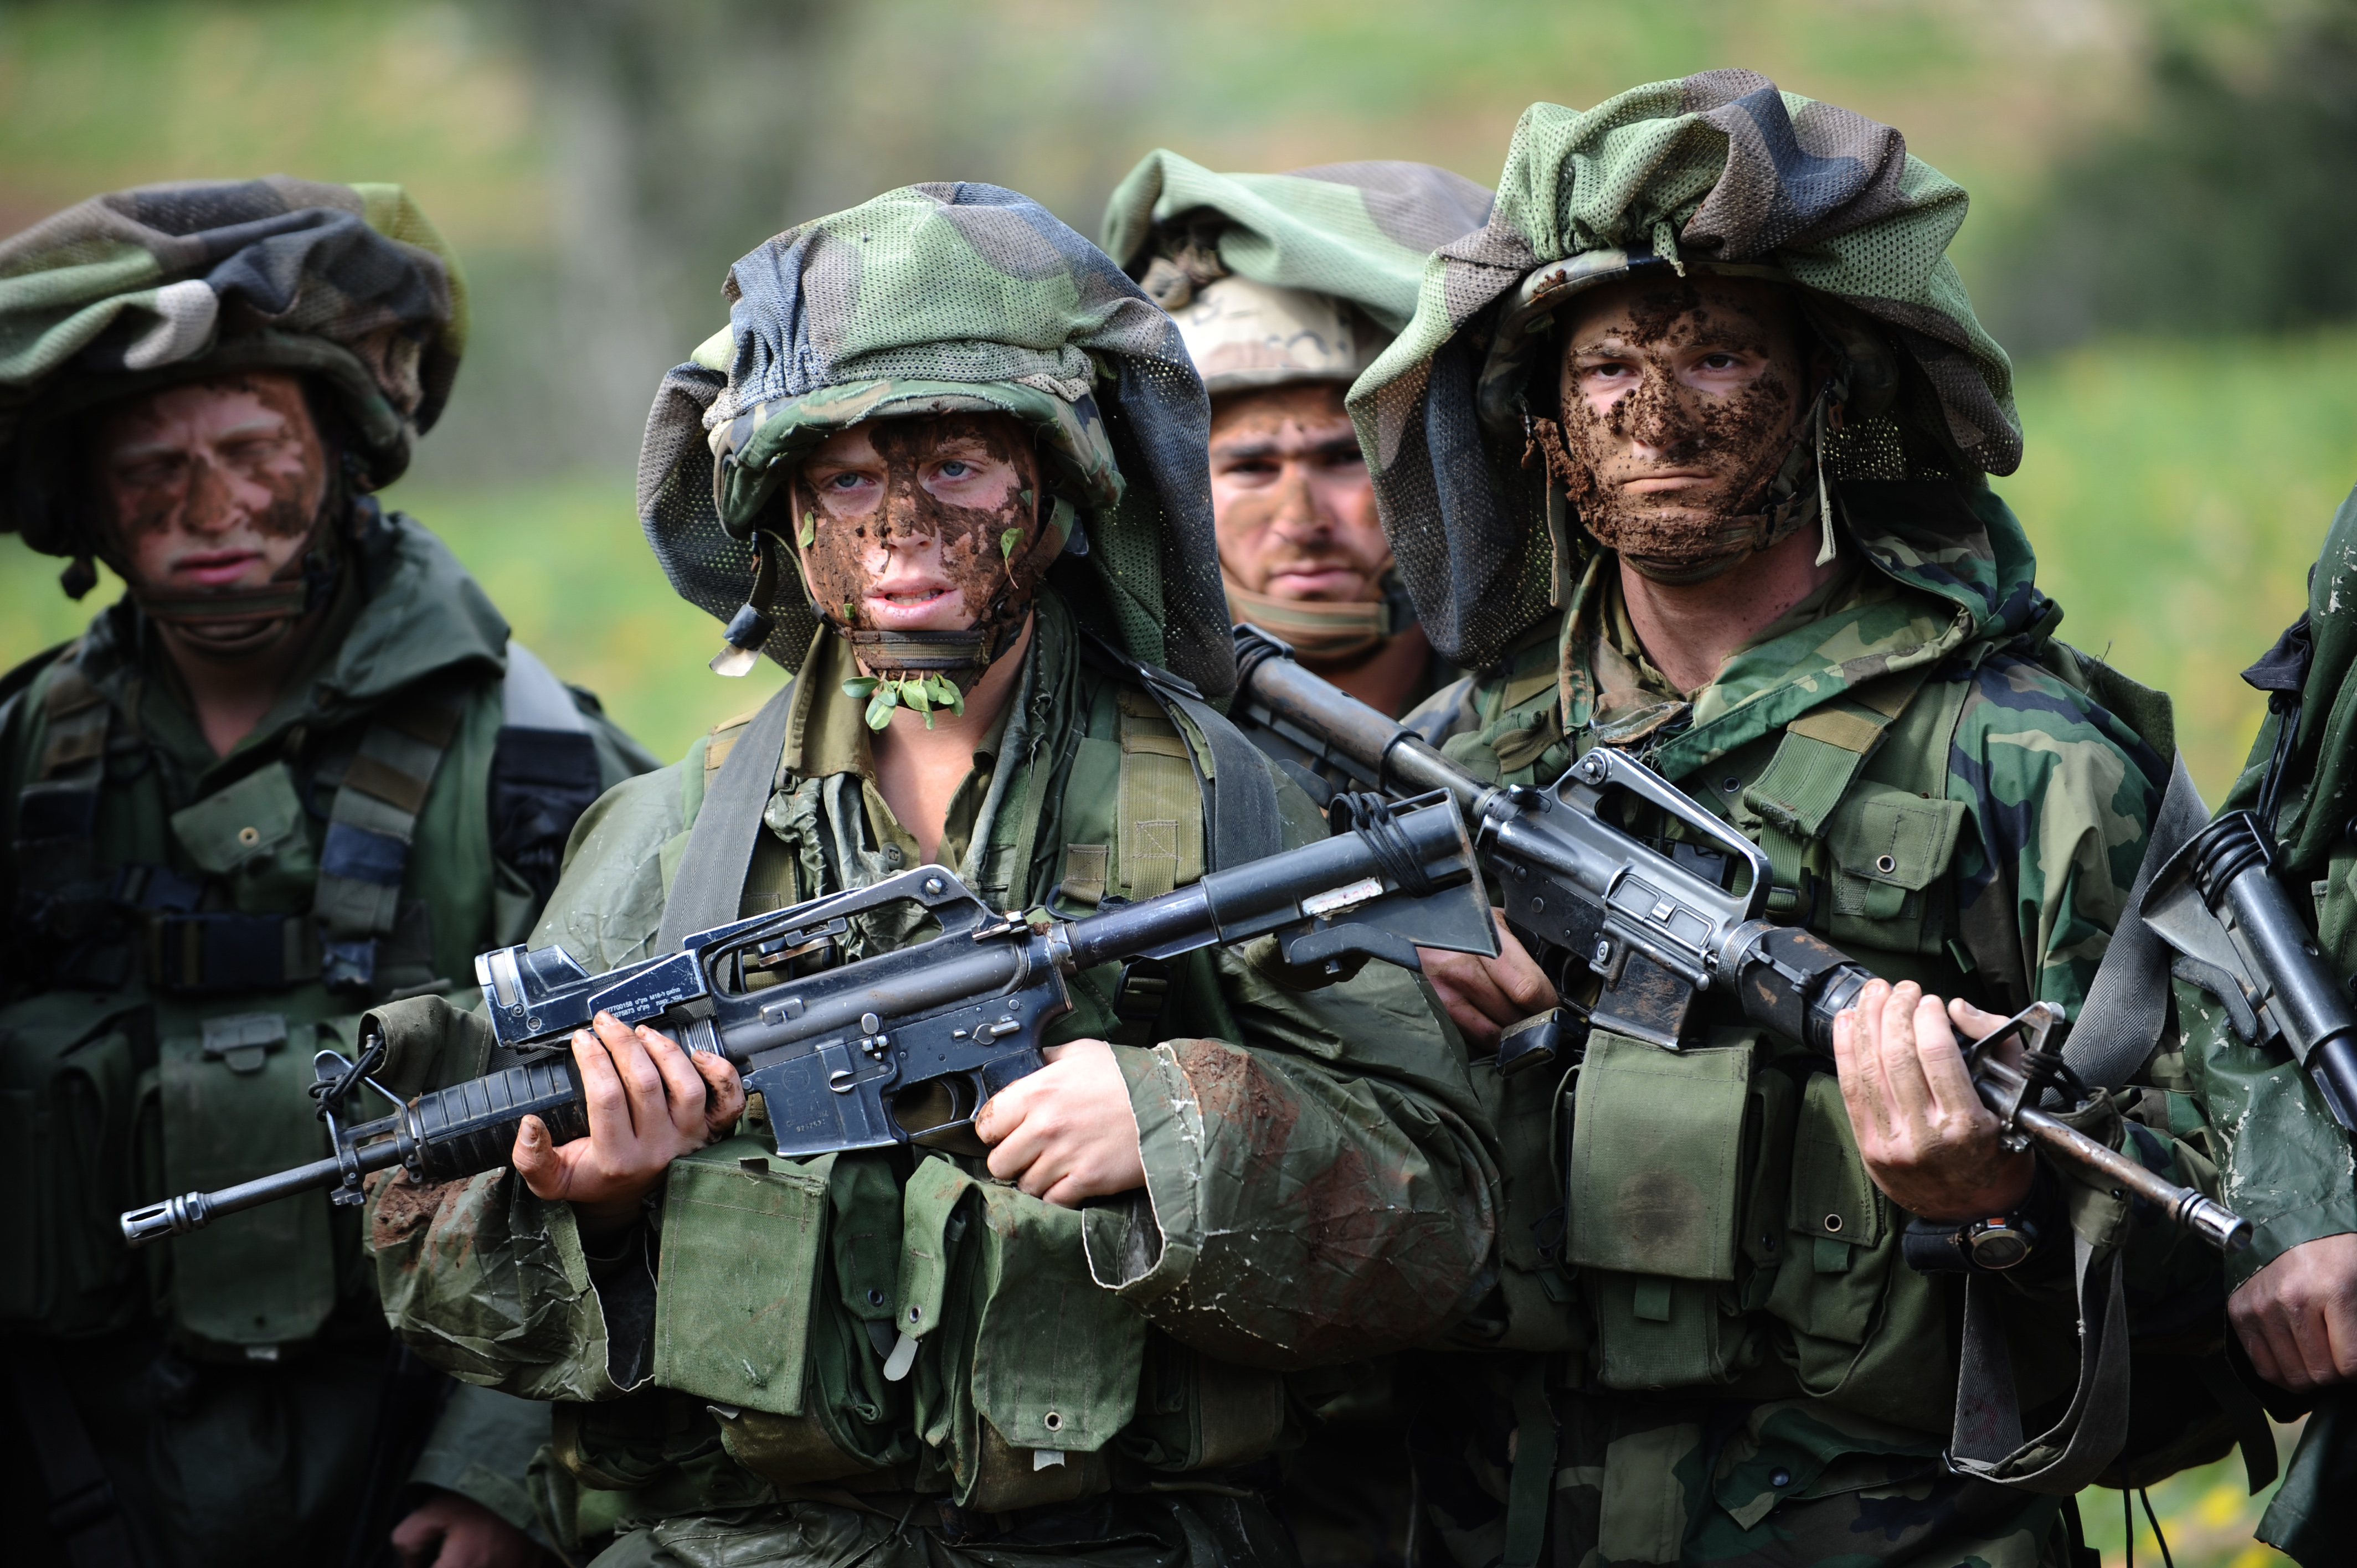 File:Flickr - Israel Defense Forces - Camouflage training of the infantry Nahal brigade.jpg - Wikipedia